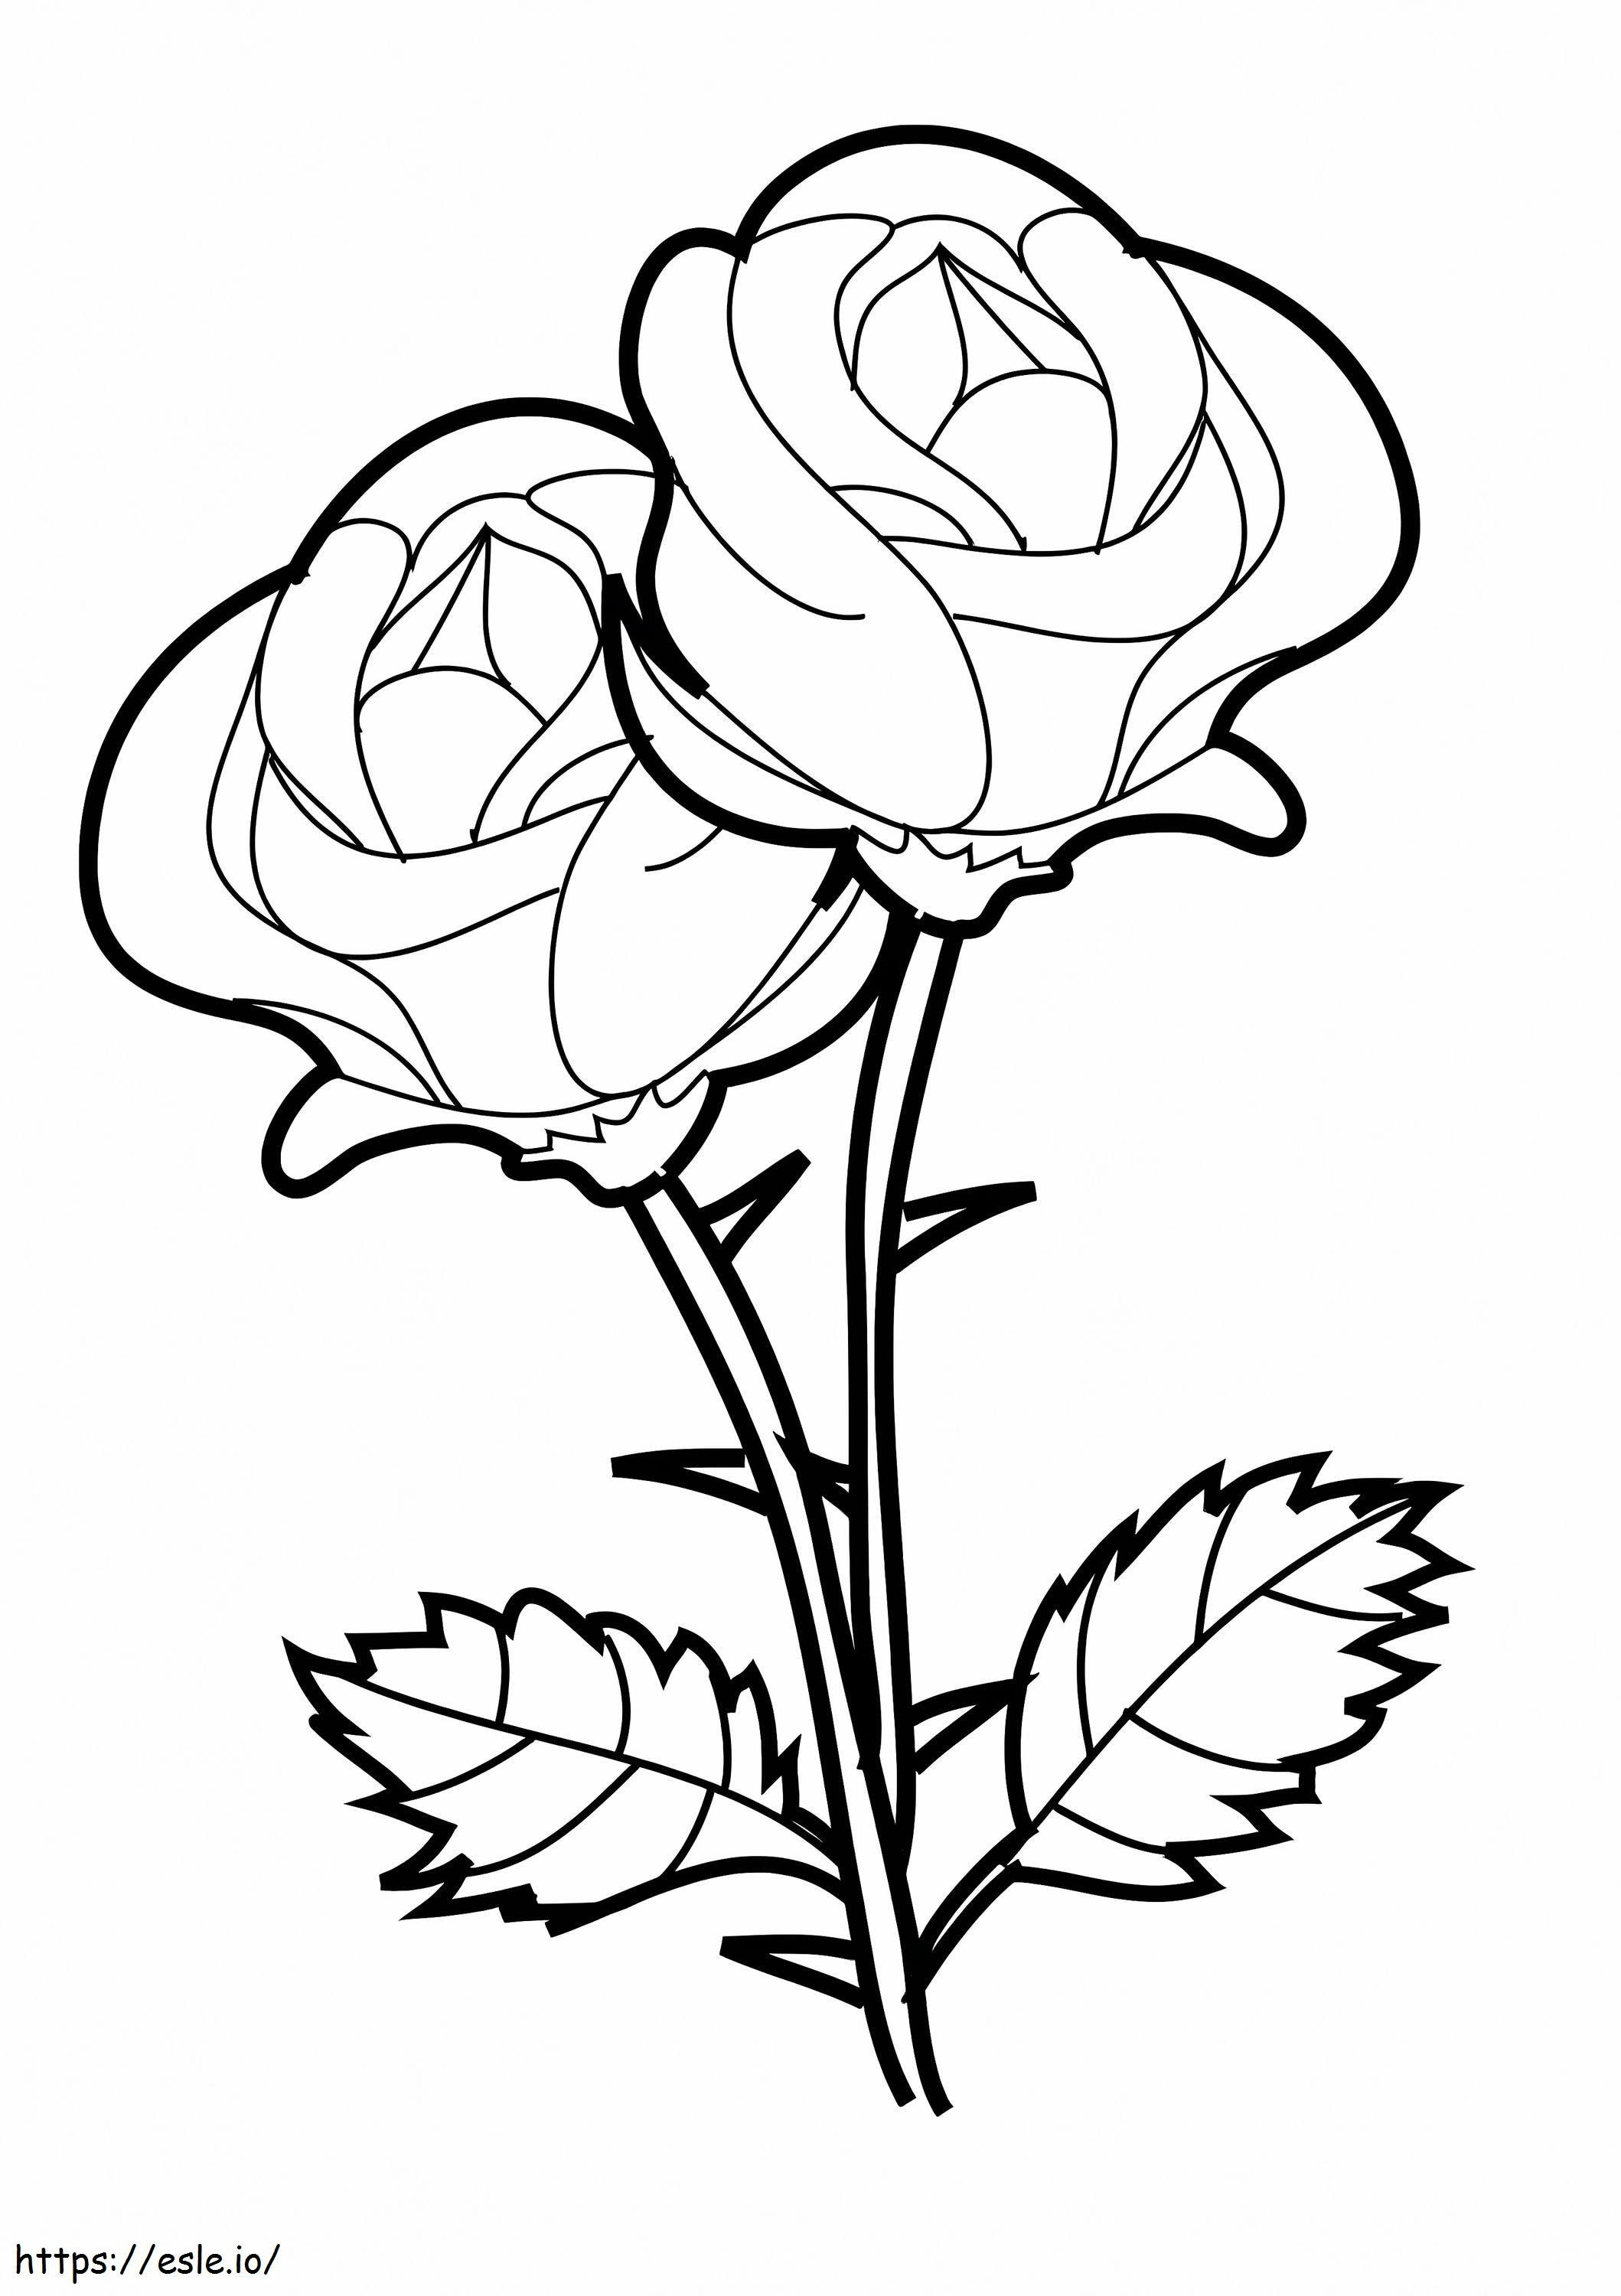 Two Roses coloring page